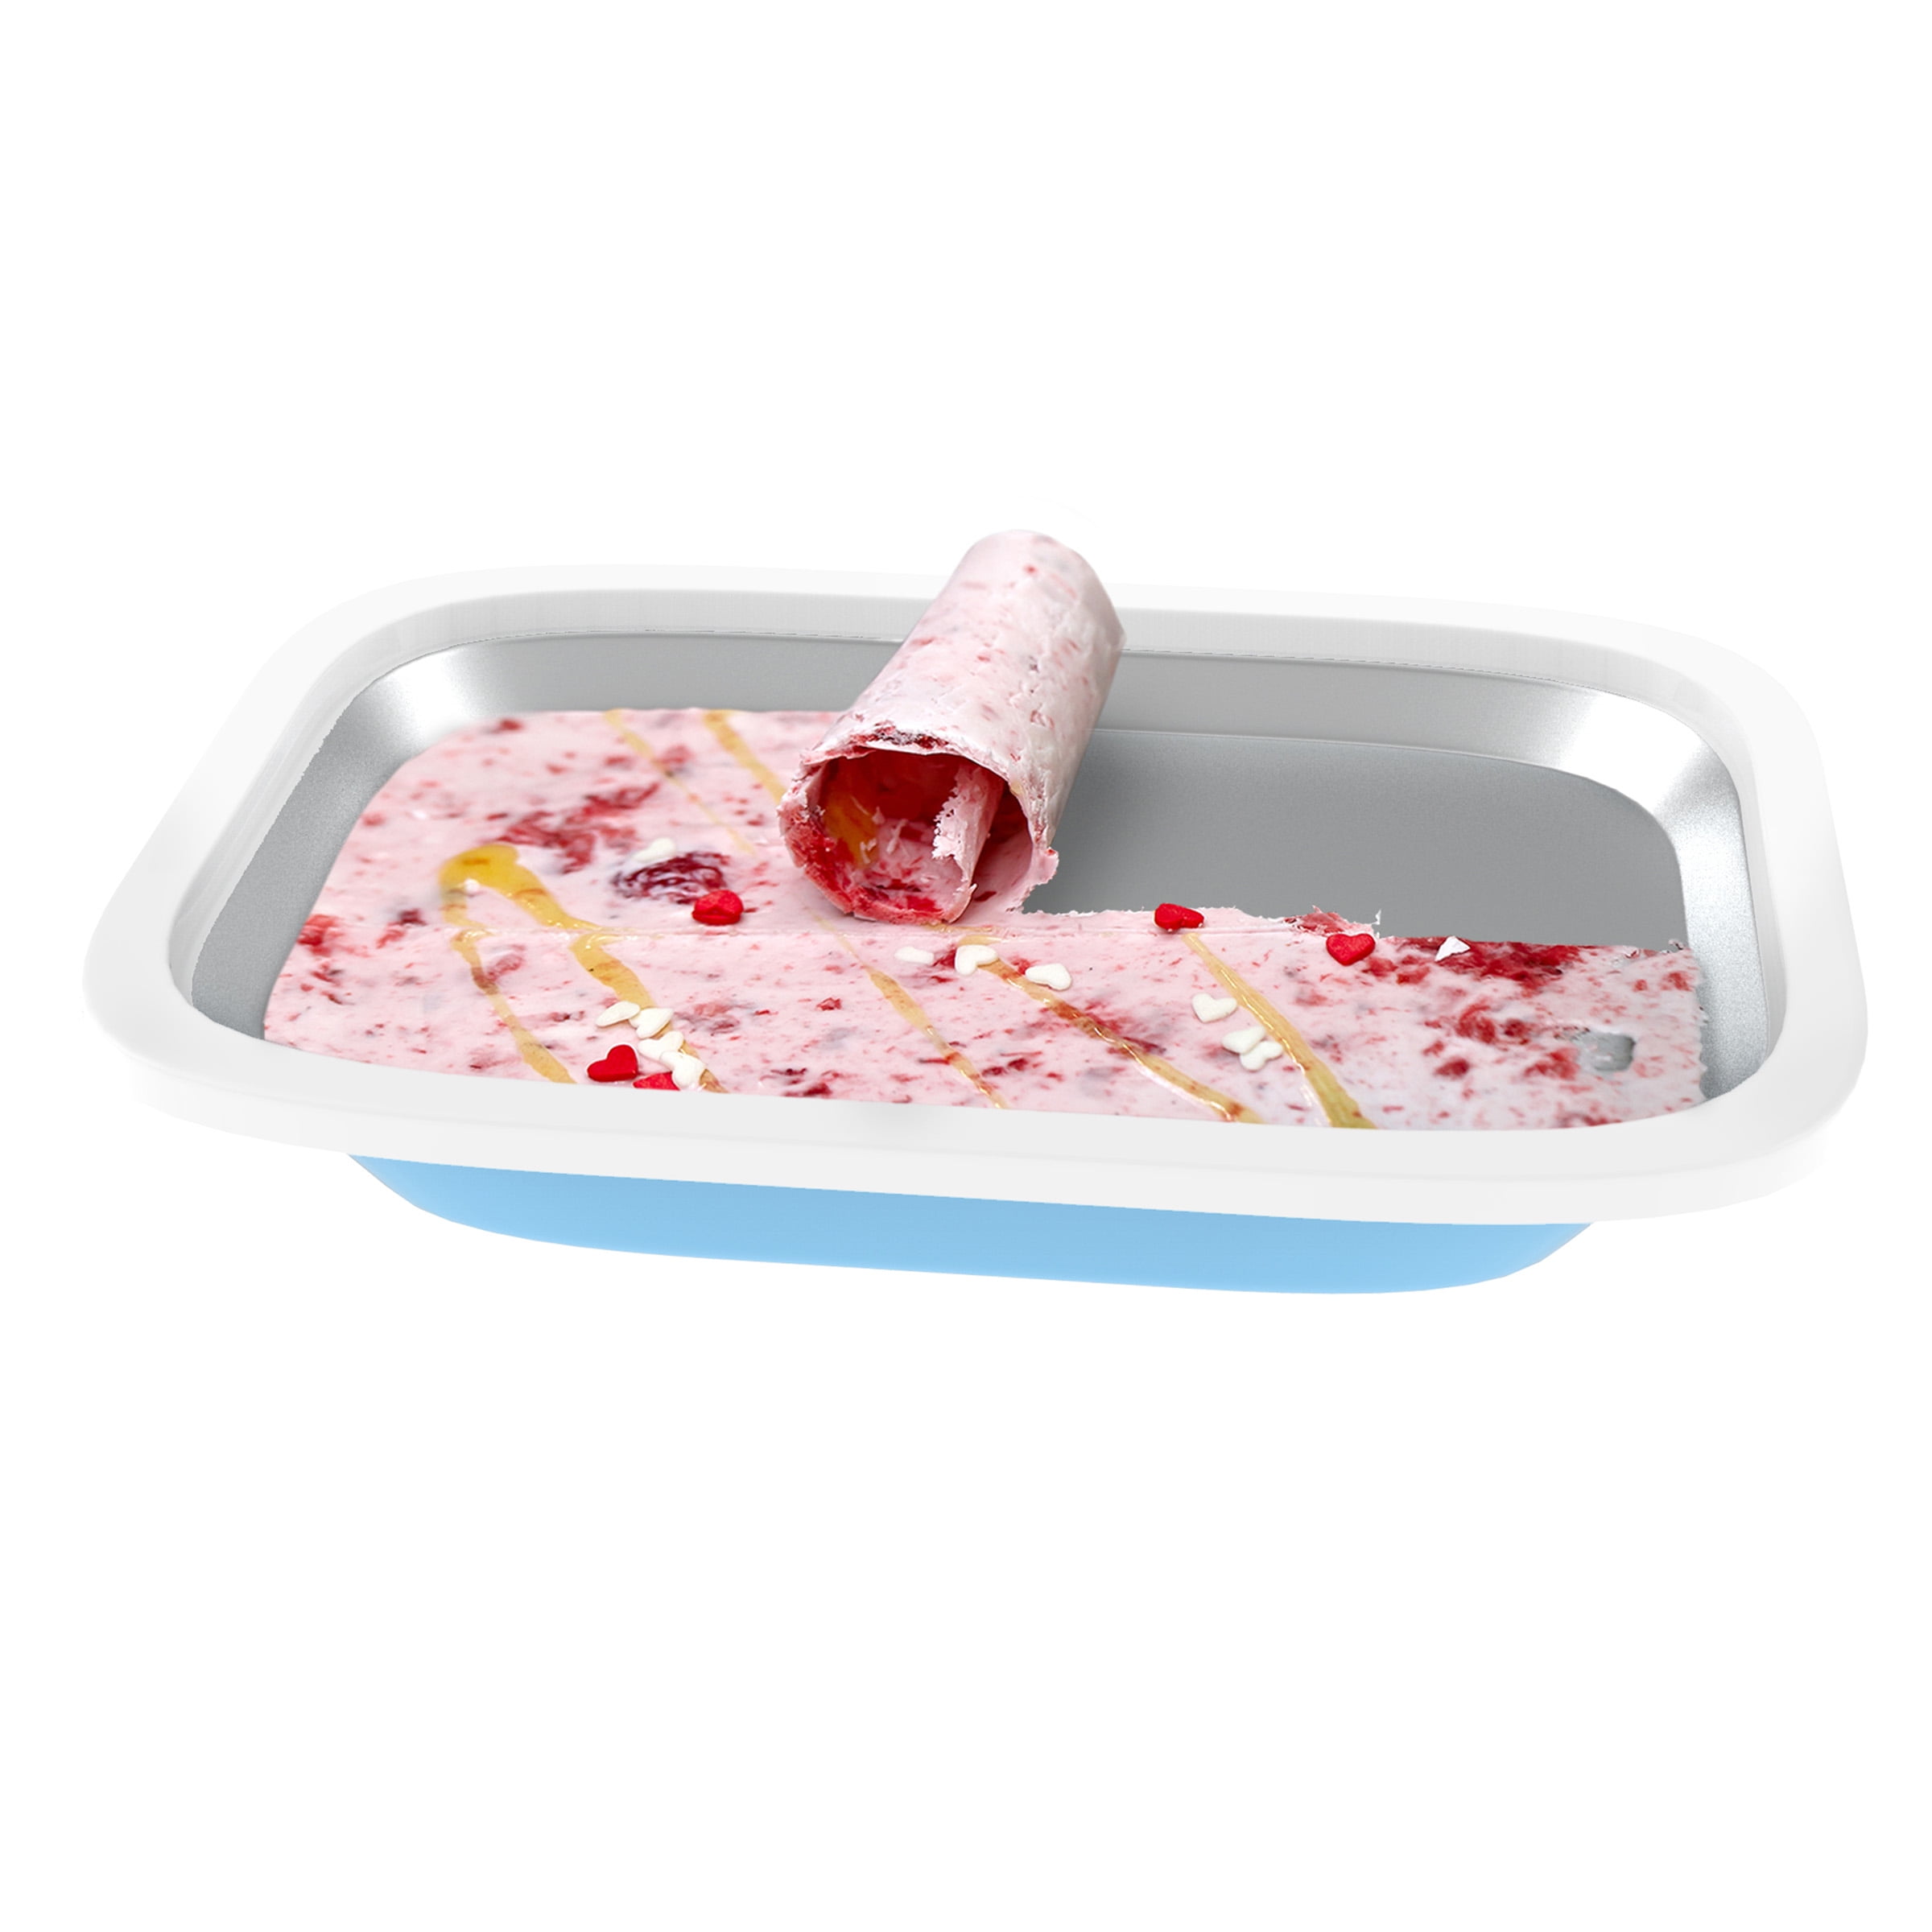 Ice Cream Roll Maker Magic Pan Perfect For Christmas Gift Includes Cups And More 